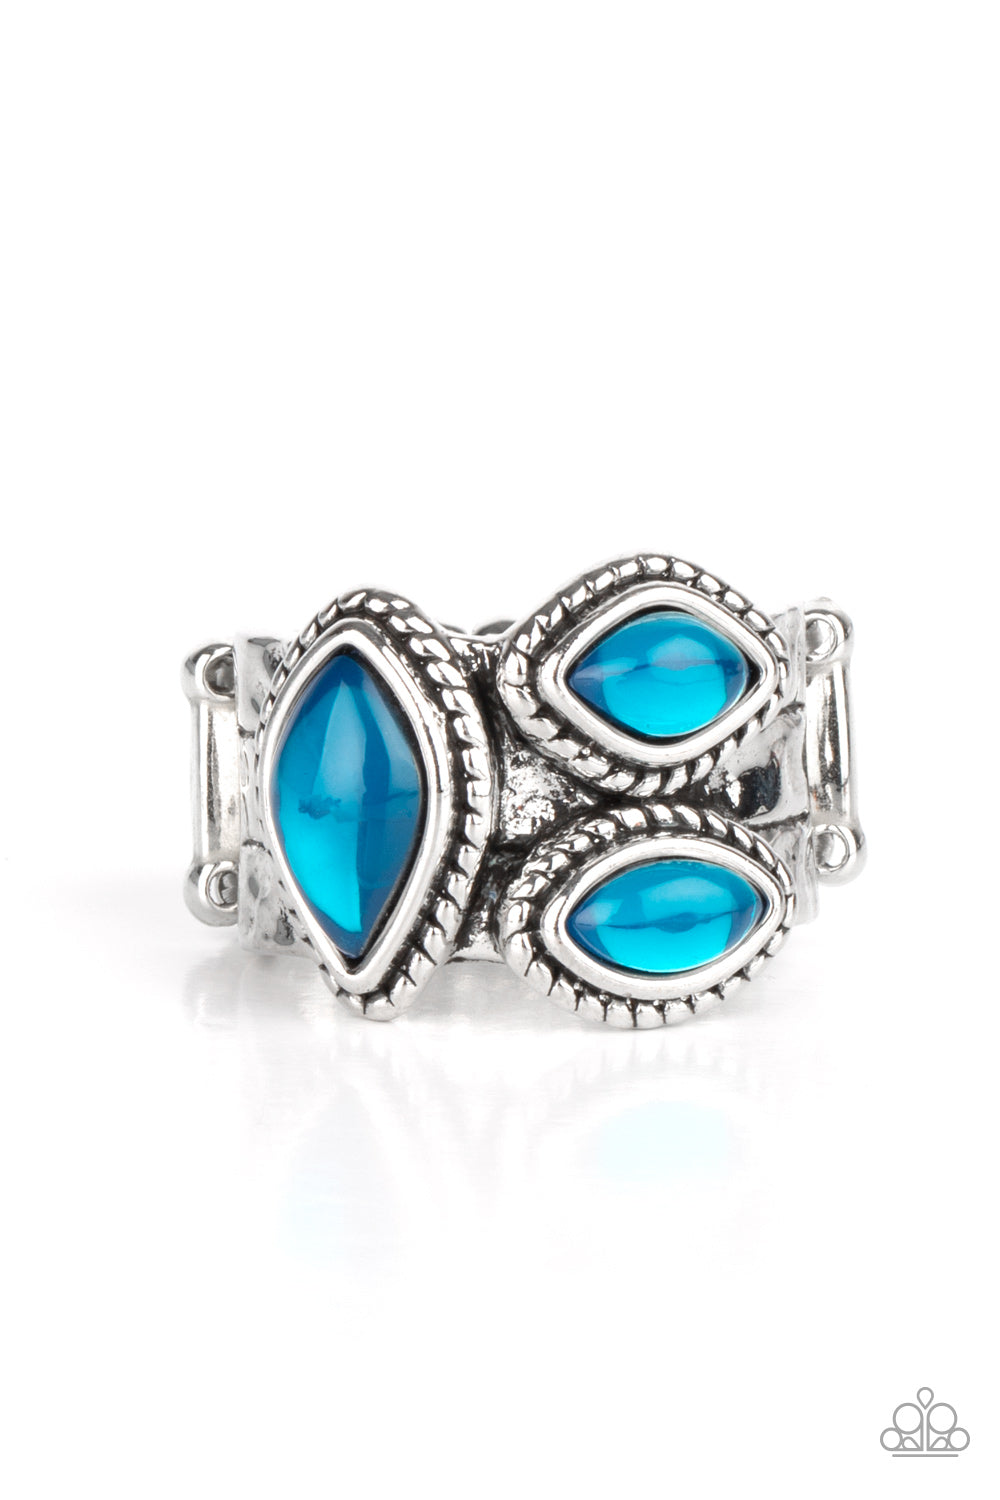 The Charisma Collector Blue Ring - Paparazzi Accessories  A trio of glassy blue marquise beads embellish the front of a hammered silver band etched in faux layers, creating an ethereal display atop the finger. Features a stretchy band for a flexible fit.  All Paparazzi Accessories are lead free and nickel free!  Sold as one individual ring.